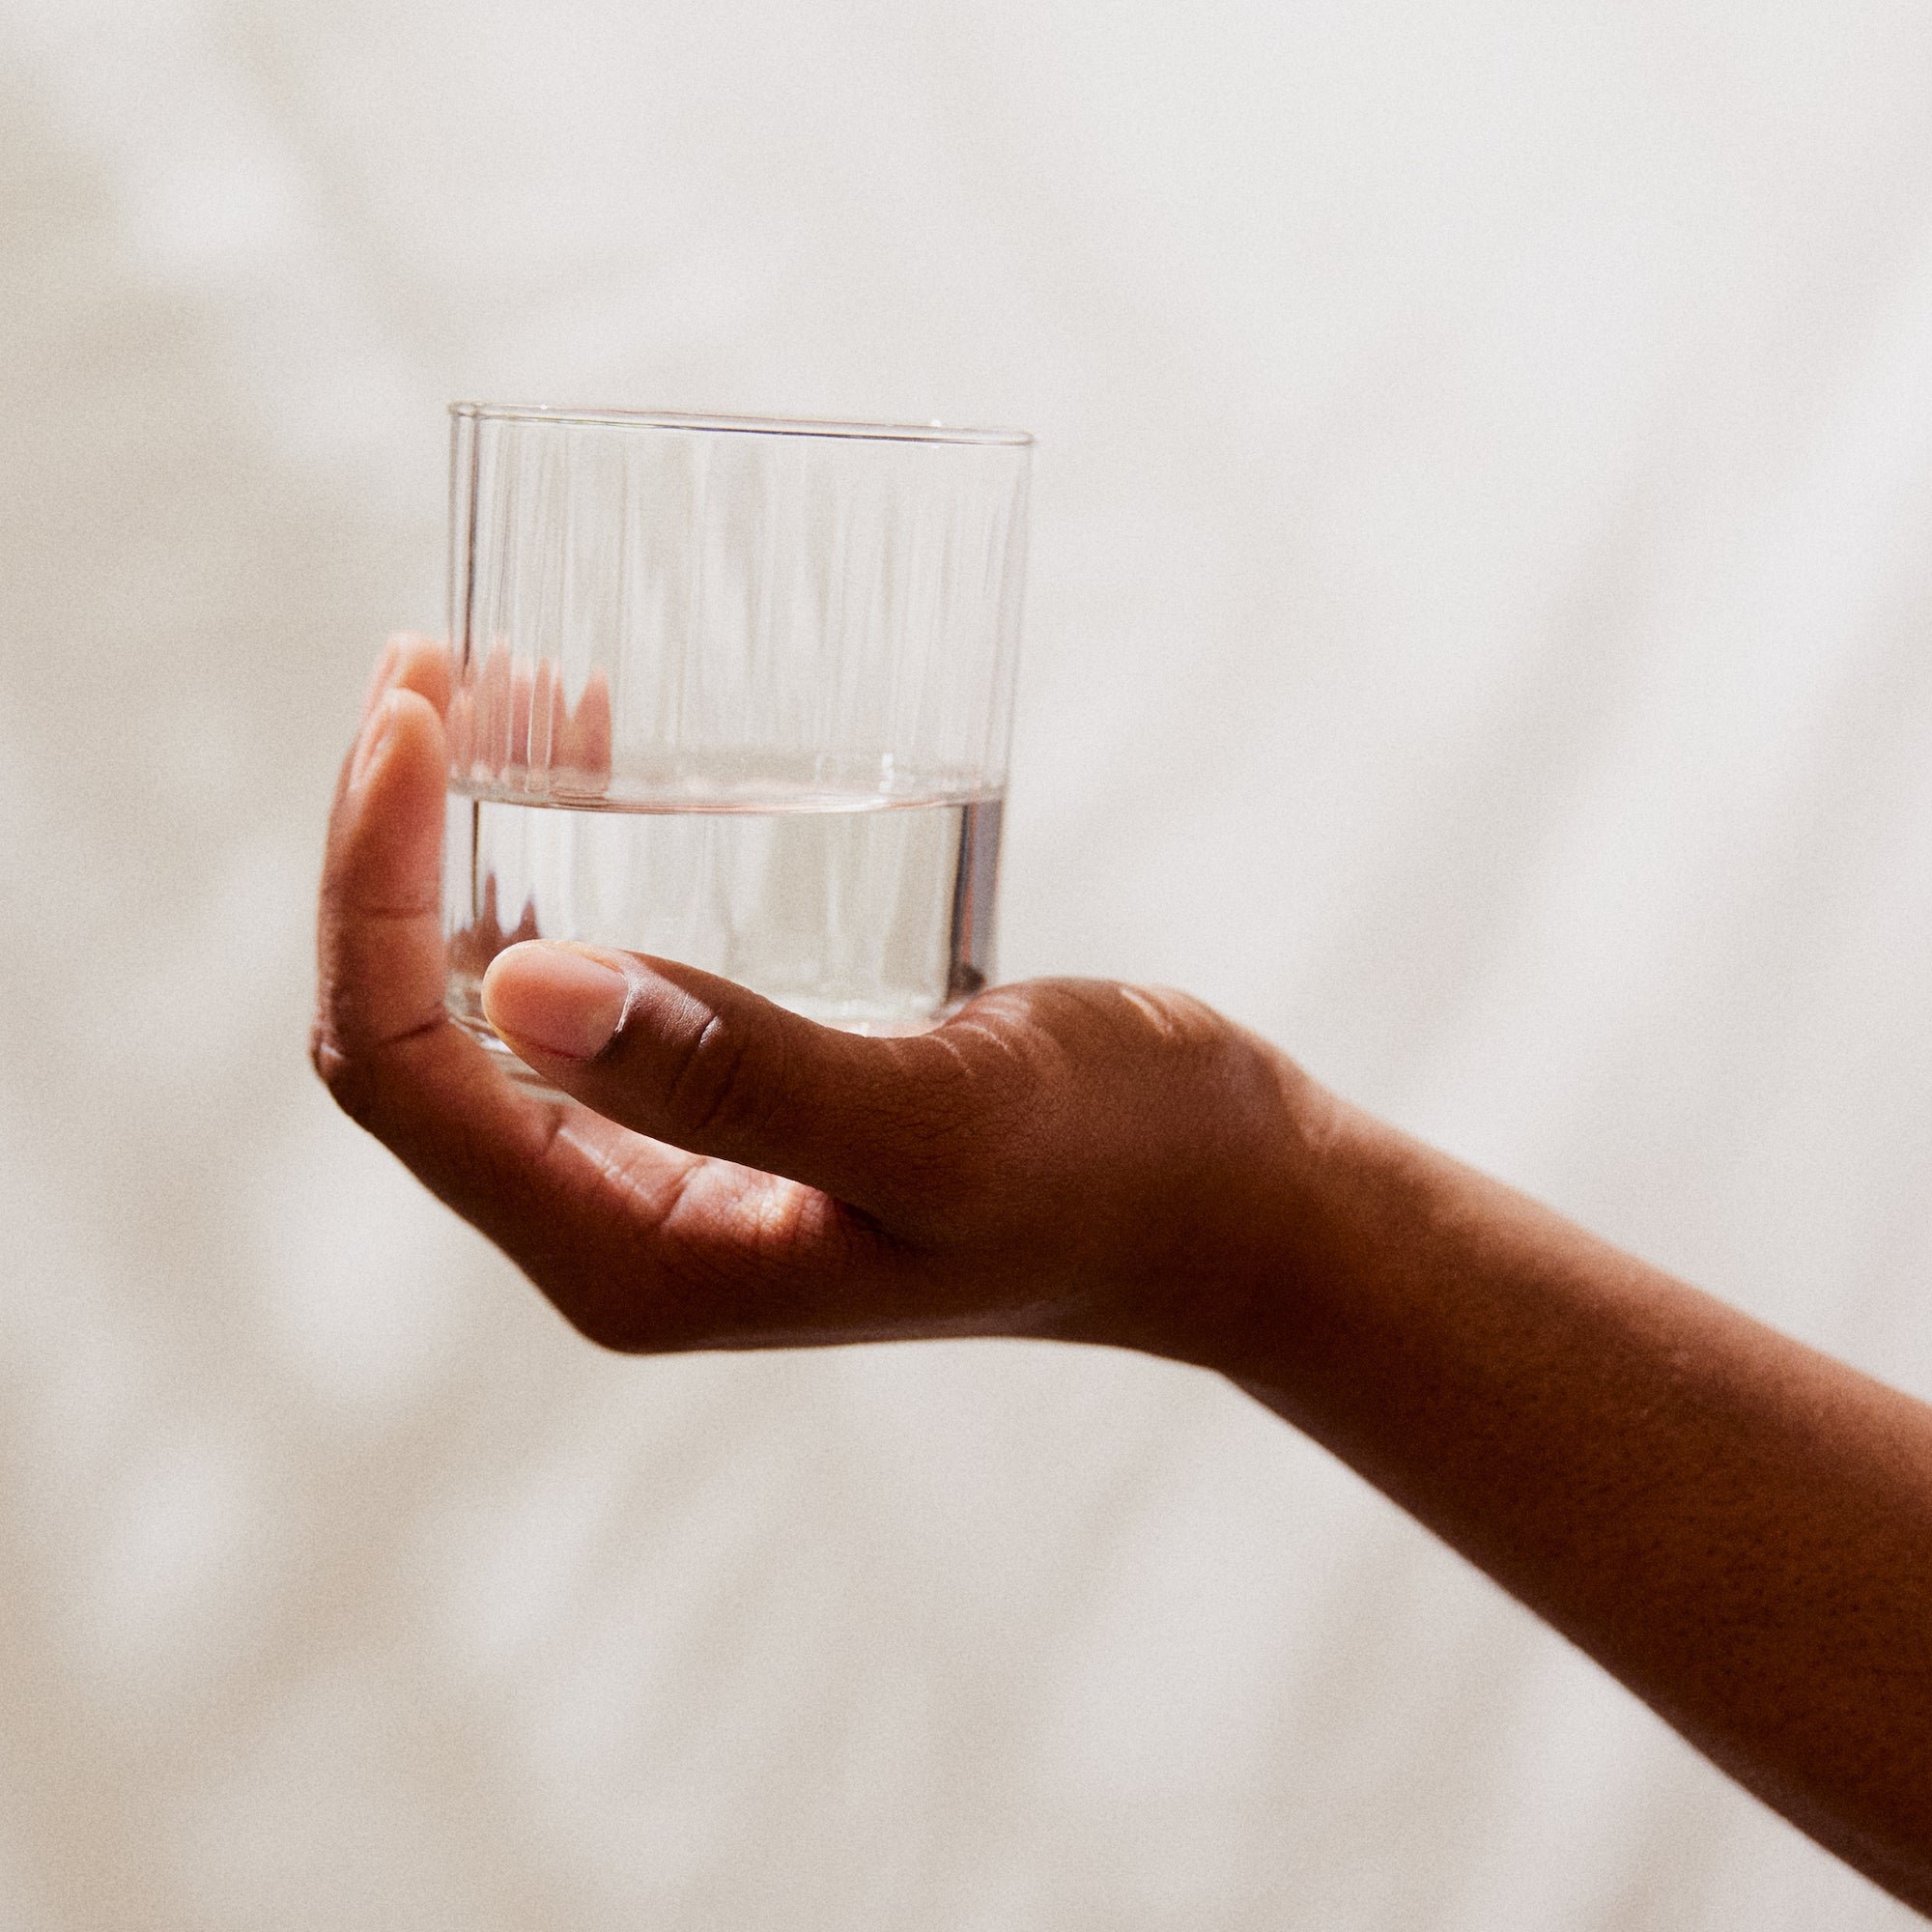 7 Things That Happen to Your Body When You're Dehydrated